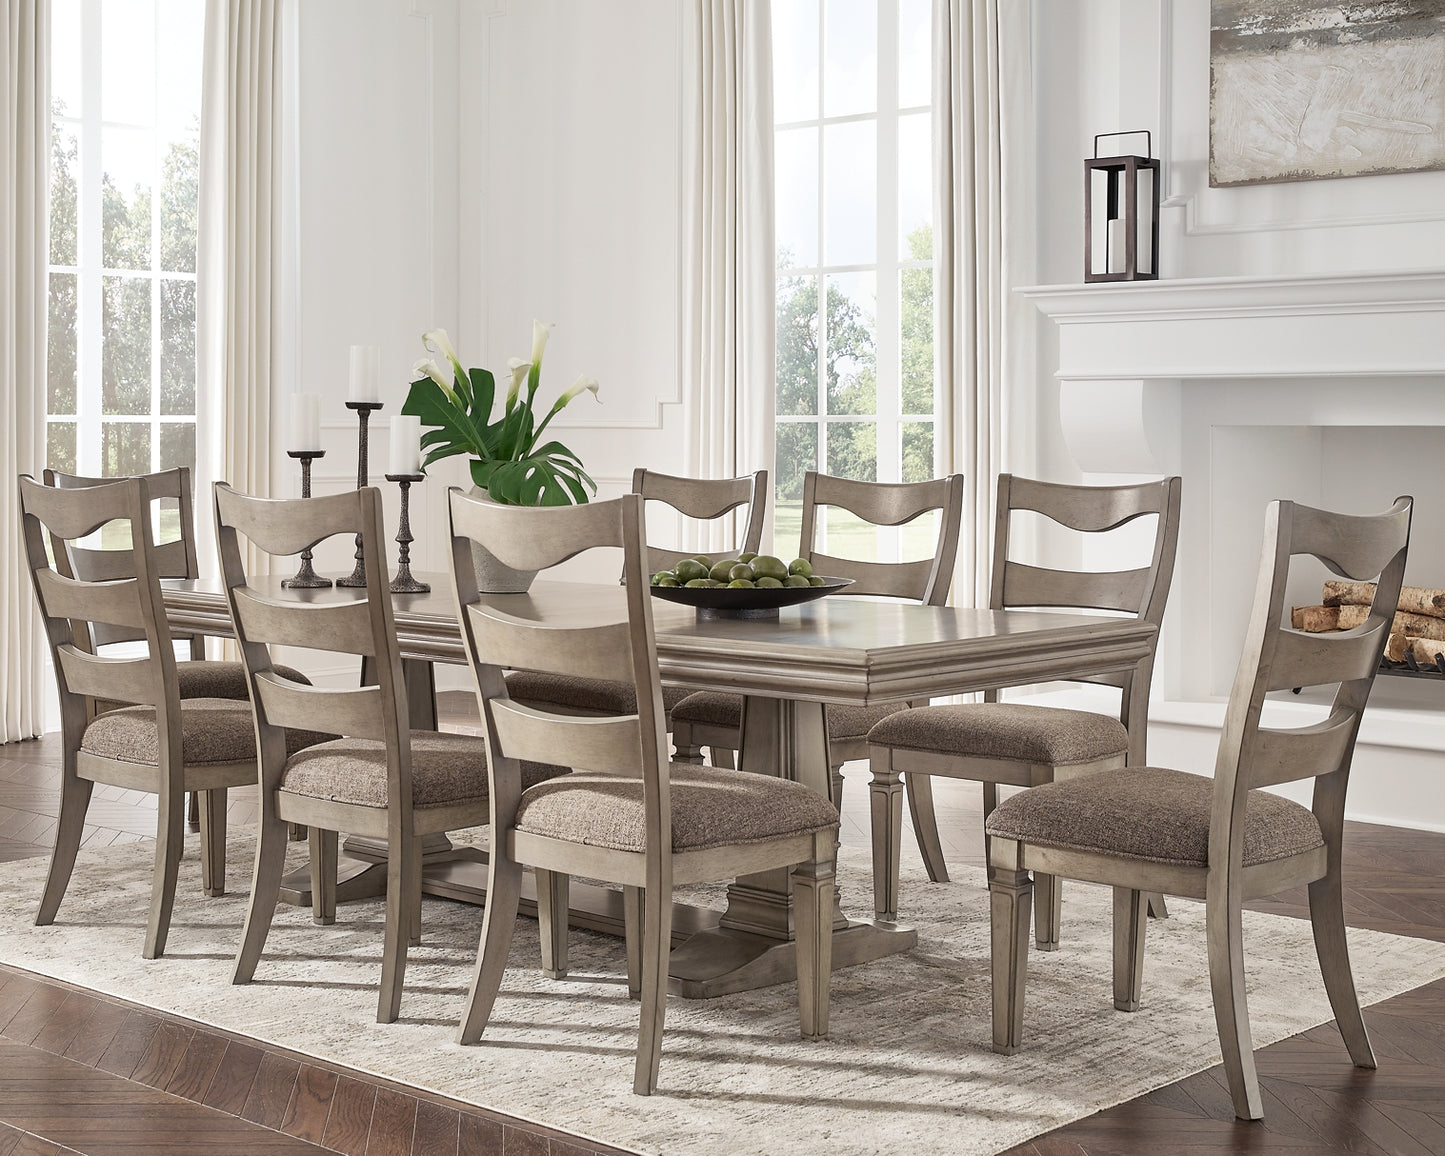 Lexorne Dining Table and 8 Chairs Wilson Furniture (OH)  in Bridgeport, Ohio. Serving Bridgeport, Yorkville, Bellaire, & Avondale